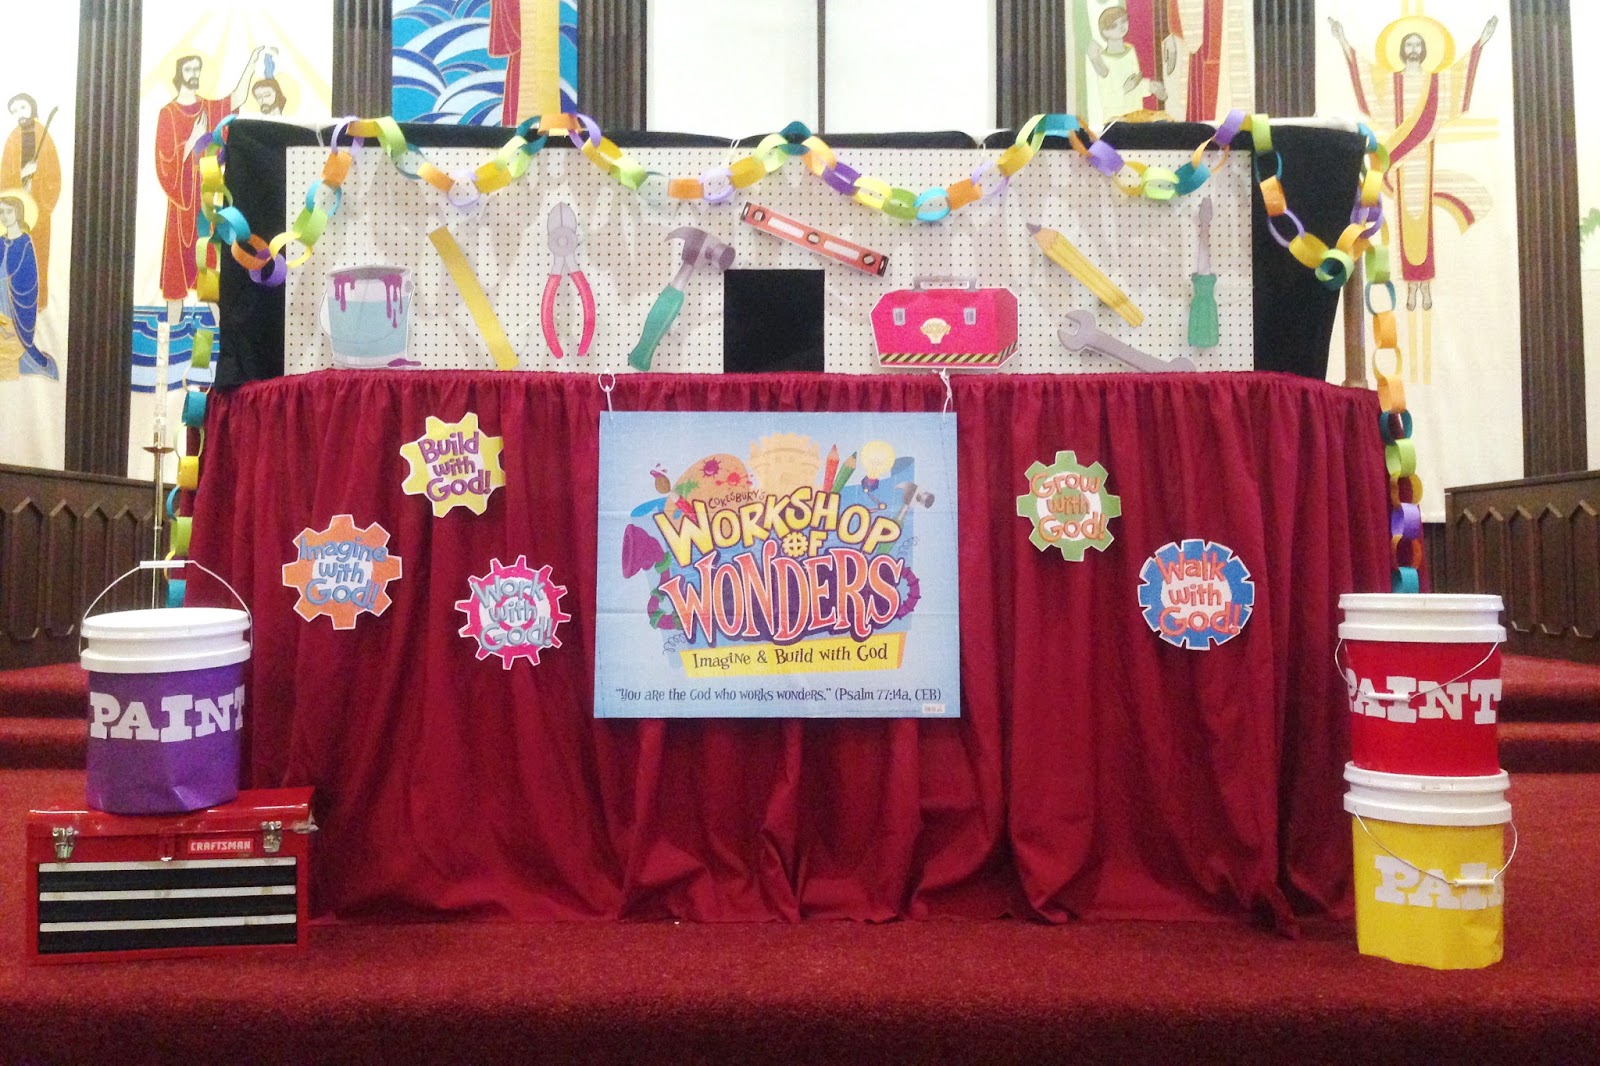 Dancing Commas :: Workshop of Wonders VBS :: Puppet stage with pegboard